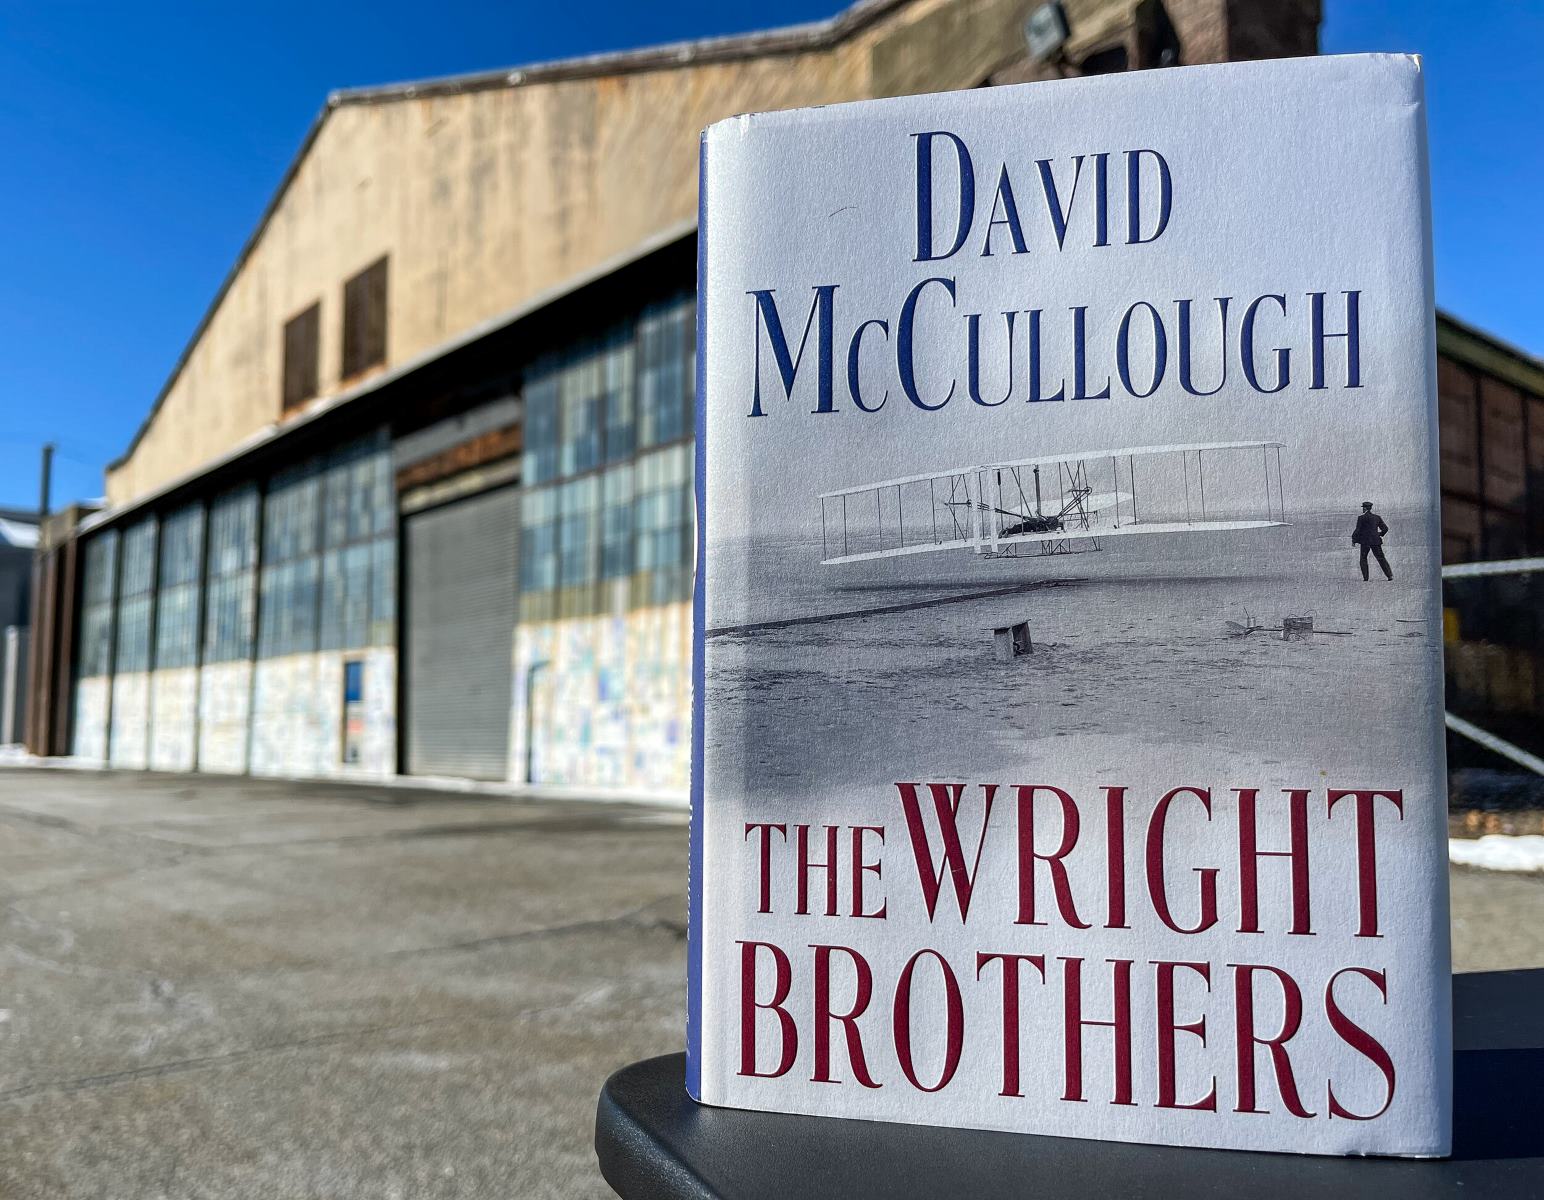 13-captivating-facts-about-the-wright-brothers-david-mccullough